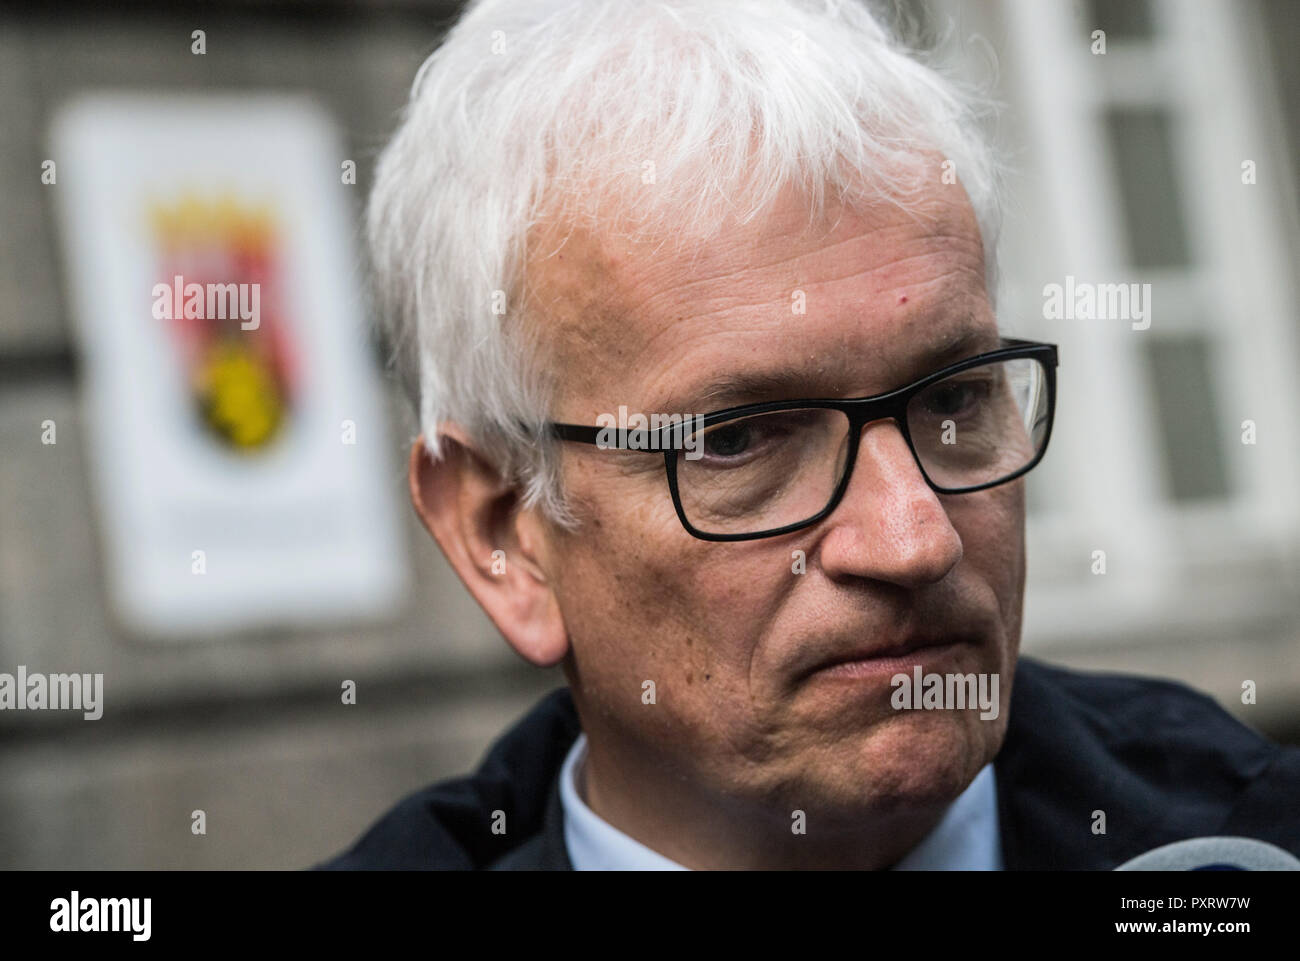 24 October 2018, Rhineland-Palatinate, Mainz: Jürgen Resch, Managing Director of Deutsche Umwelthilfe, is before the Administrative Court before the start of negotiations. The Administrative Court is negotiating a possible ban on diesel driving in the state capital of Rhineland-Palatinate. The case concerns a complaint by Deutsche Umwelthilfe (DUH) against the city of Mainz concerning exceeded limit values for nitrogen dioxide (NO2) in the air. Photo: Andreas Arnold/dpa Stock Photo